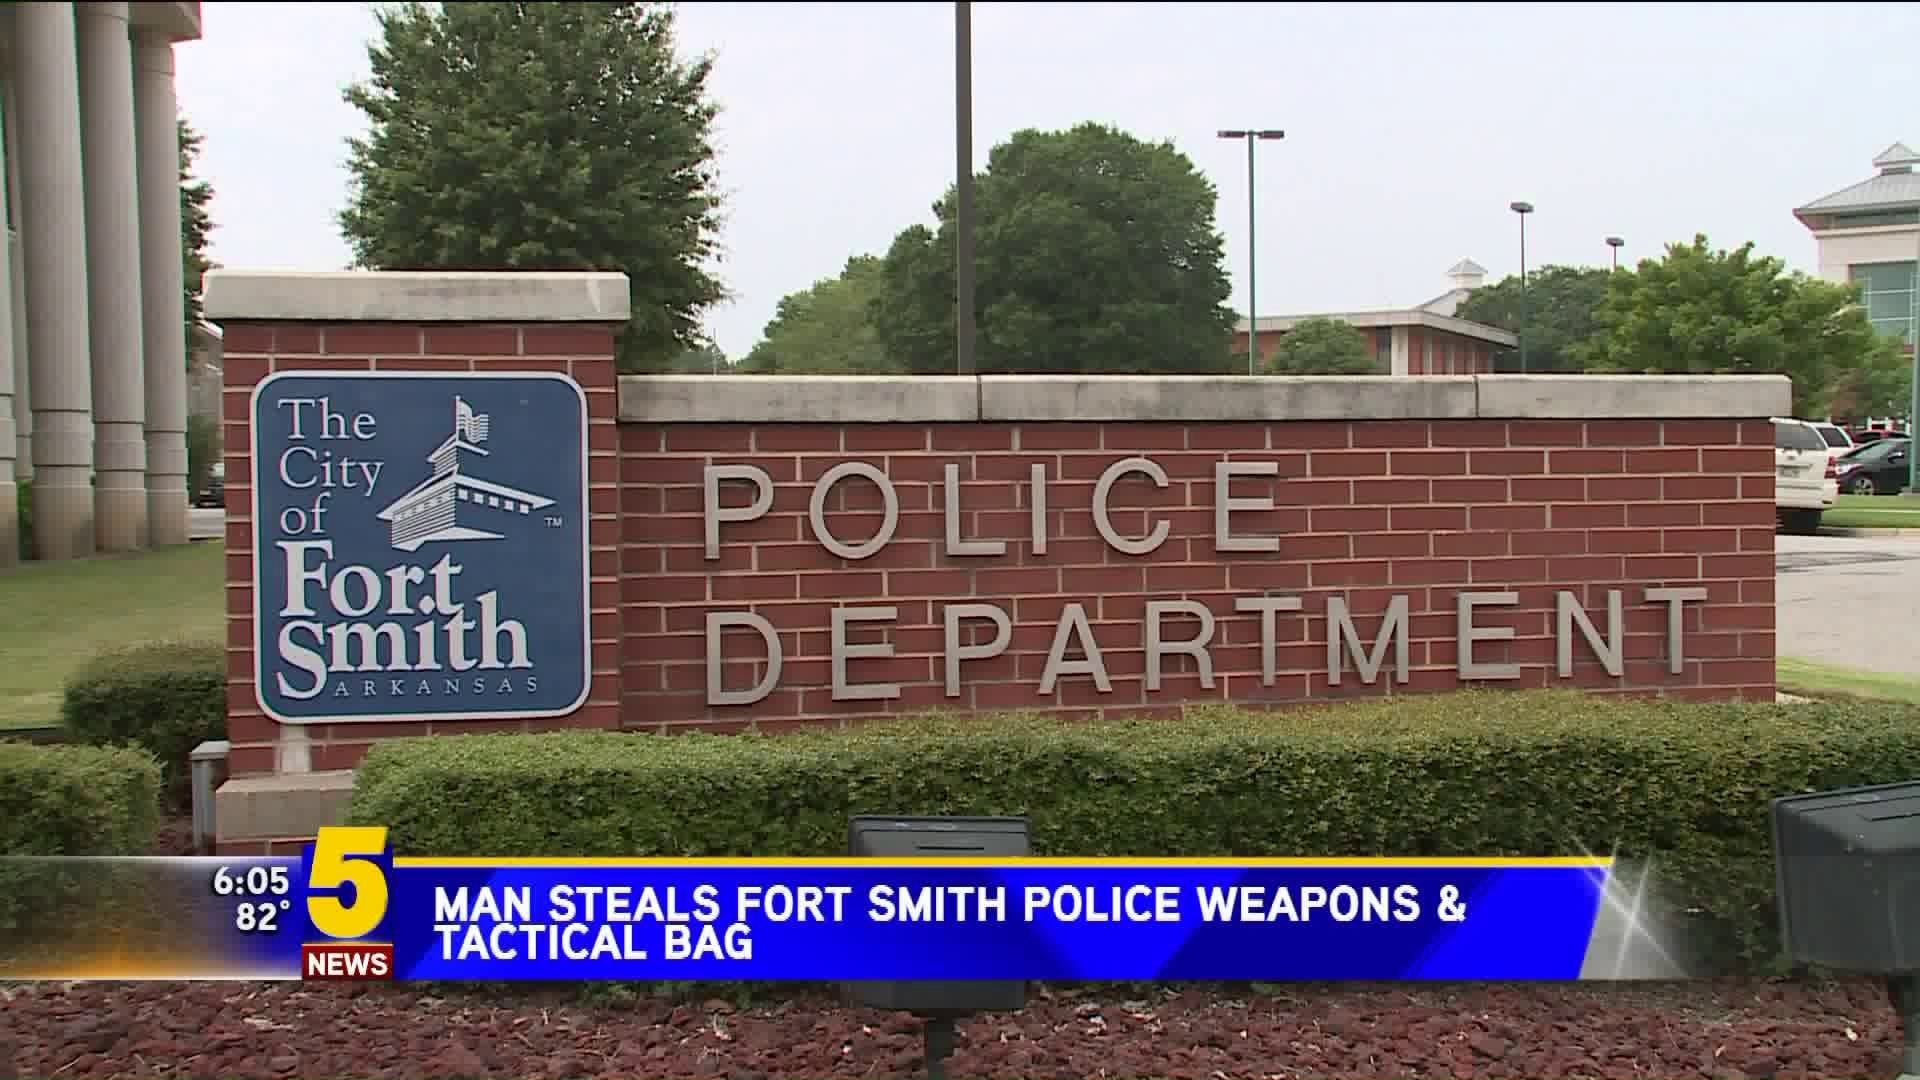 Man Steals Fort Smith Police Weapons & Tactical Bag